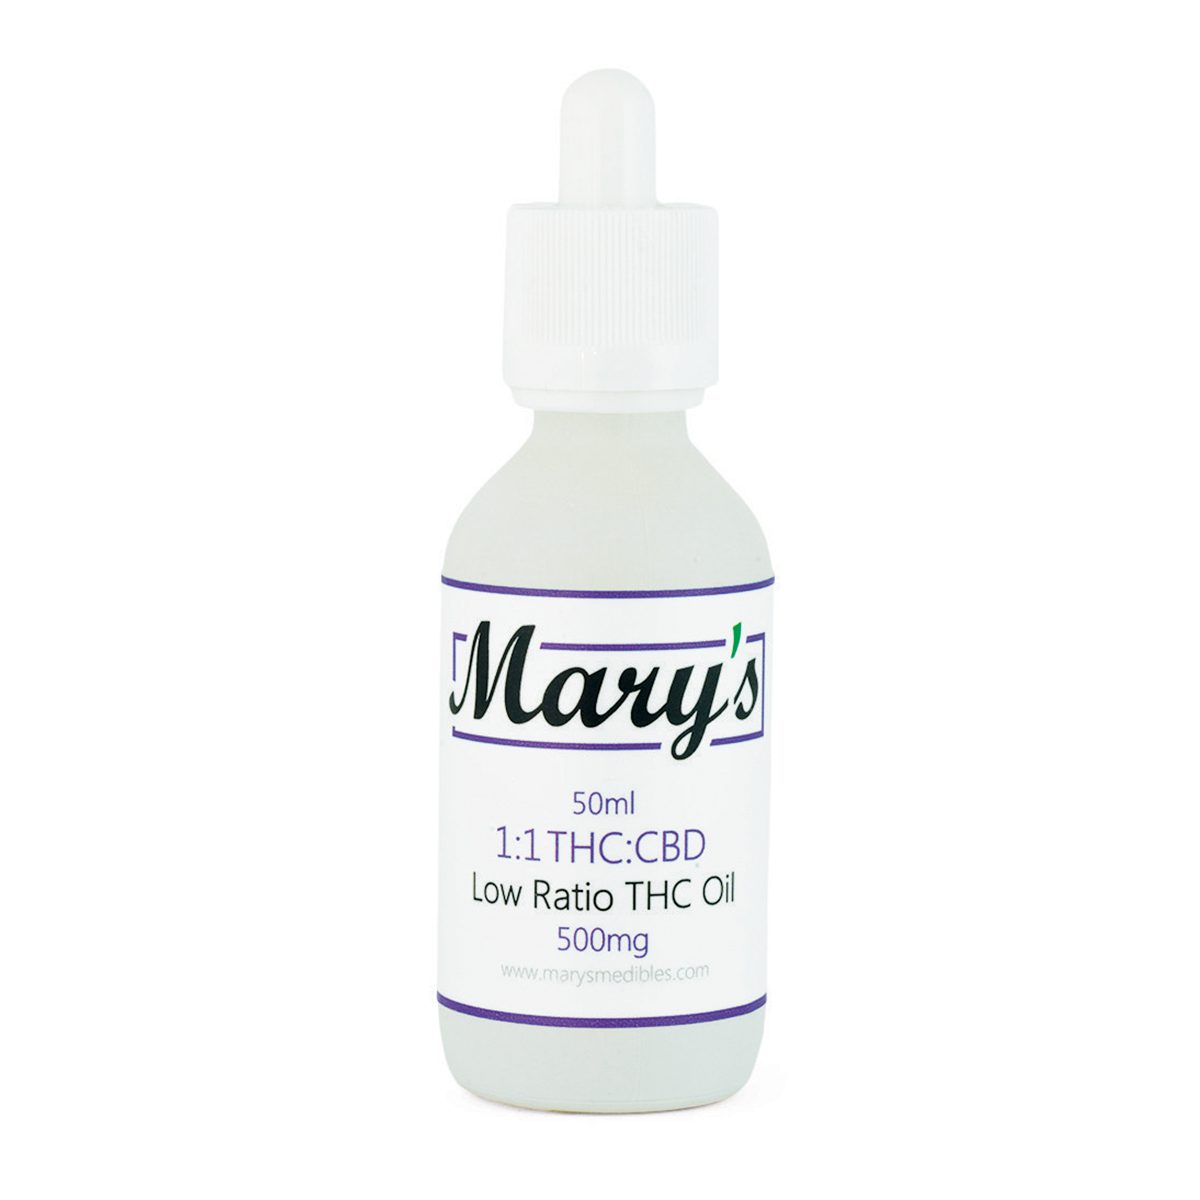 Low-Ratio-1-1-THC-CBD-500MG-Tincture-By-Mary’s-Medibles